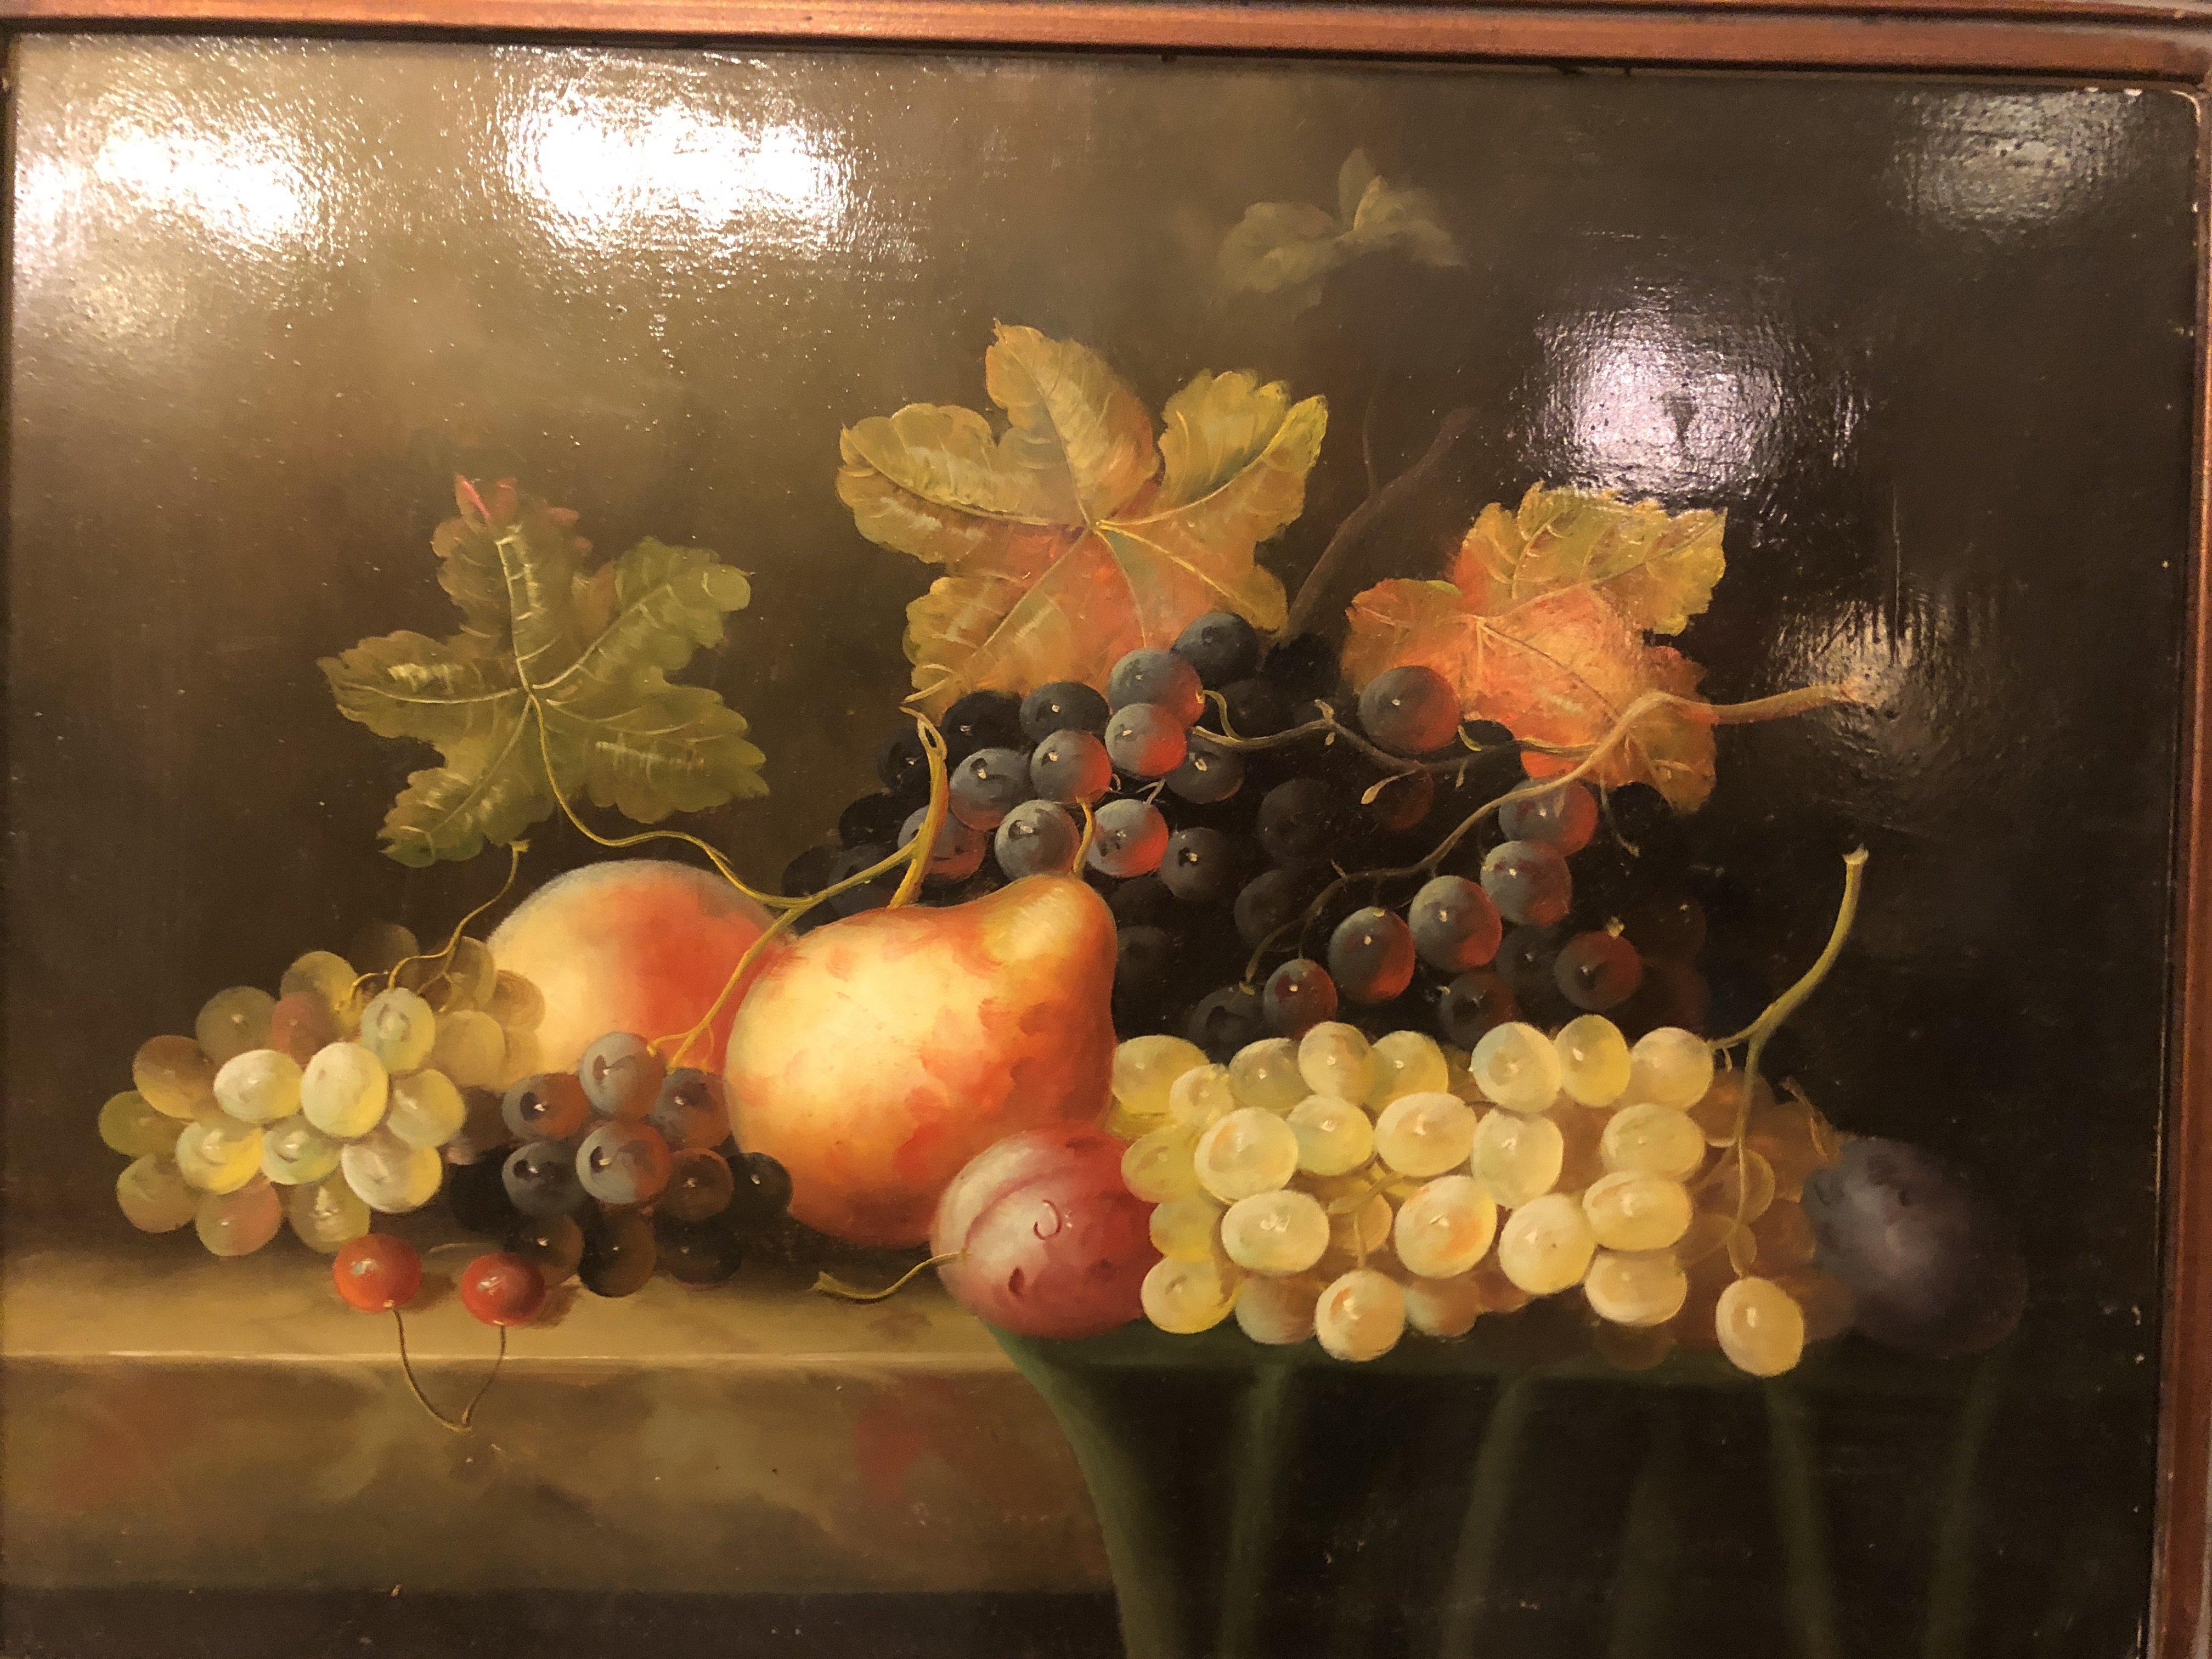 A classic still life fruit oil on panel painting. The painting is framed in a custom hand carved wooden frame. The painting is unsigned.

Dimensions : 23